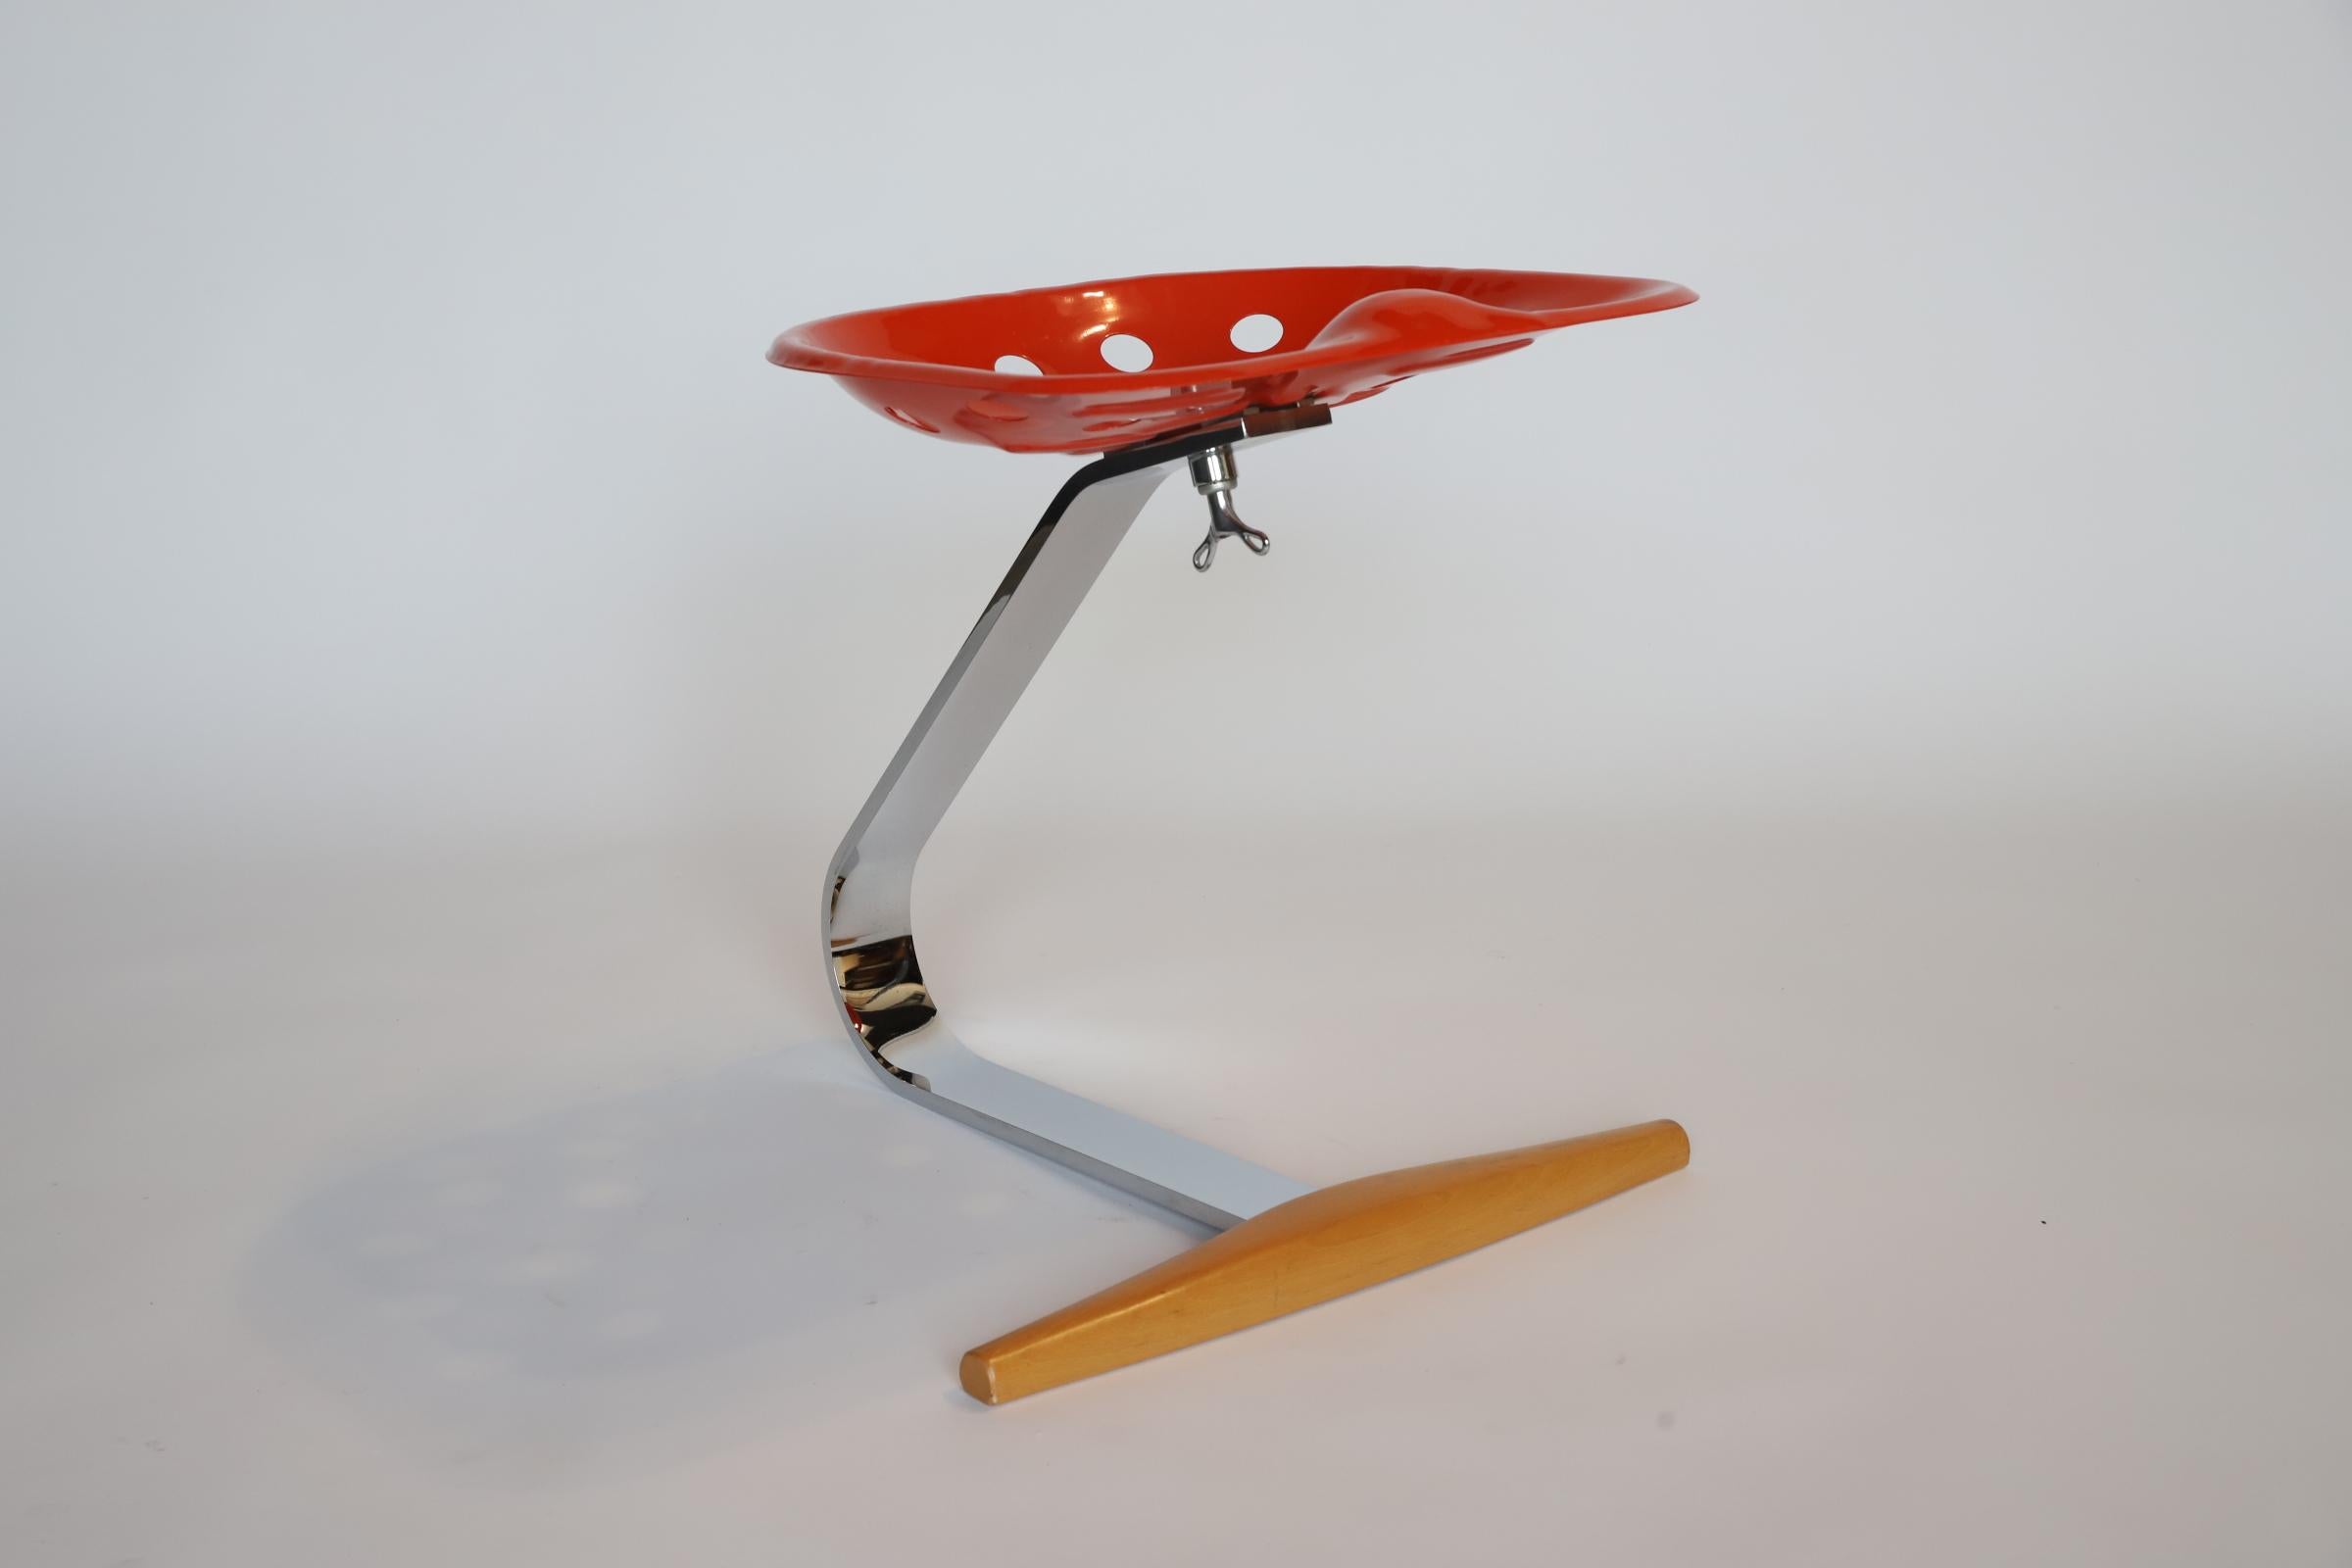 Modern, Italian Mezzadro “tractor” stool by Achille Castiglioni. Originally designed in the 1950s, this simple, but iconic stool consists of a tractor seat, bent flat bar steel and wood. Retains manufacturer stamp, as well as, ‘Made in Italy’ on